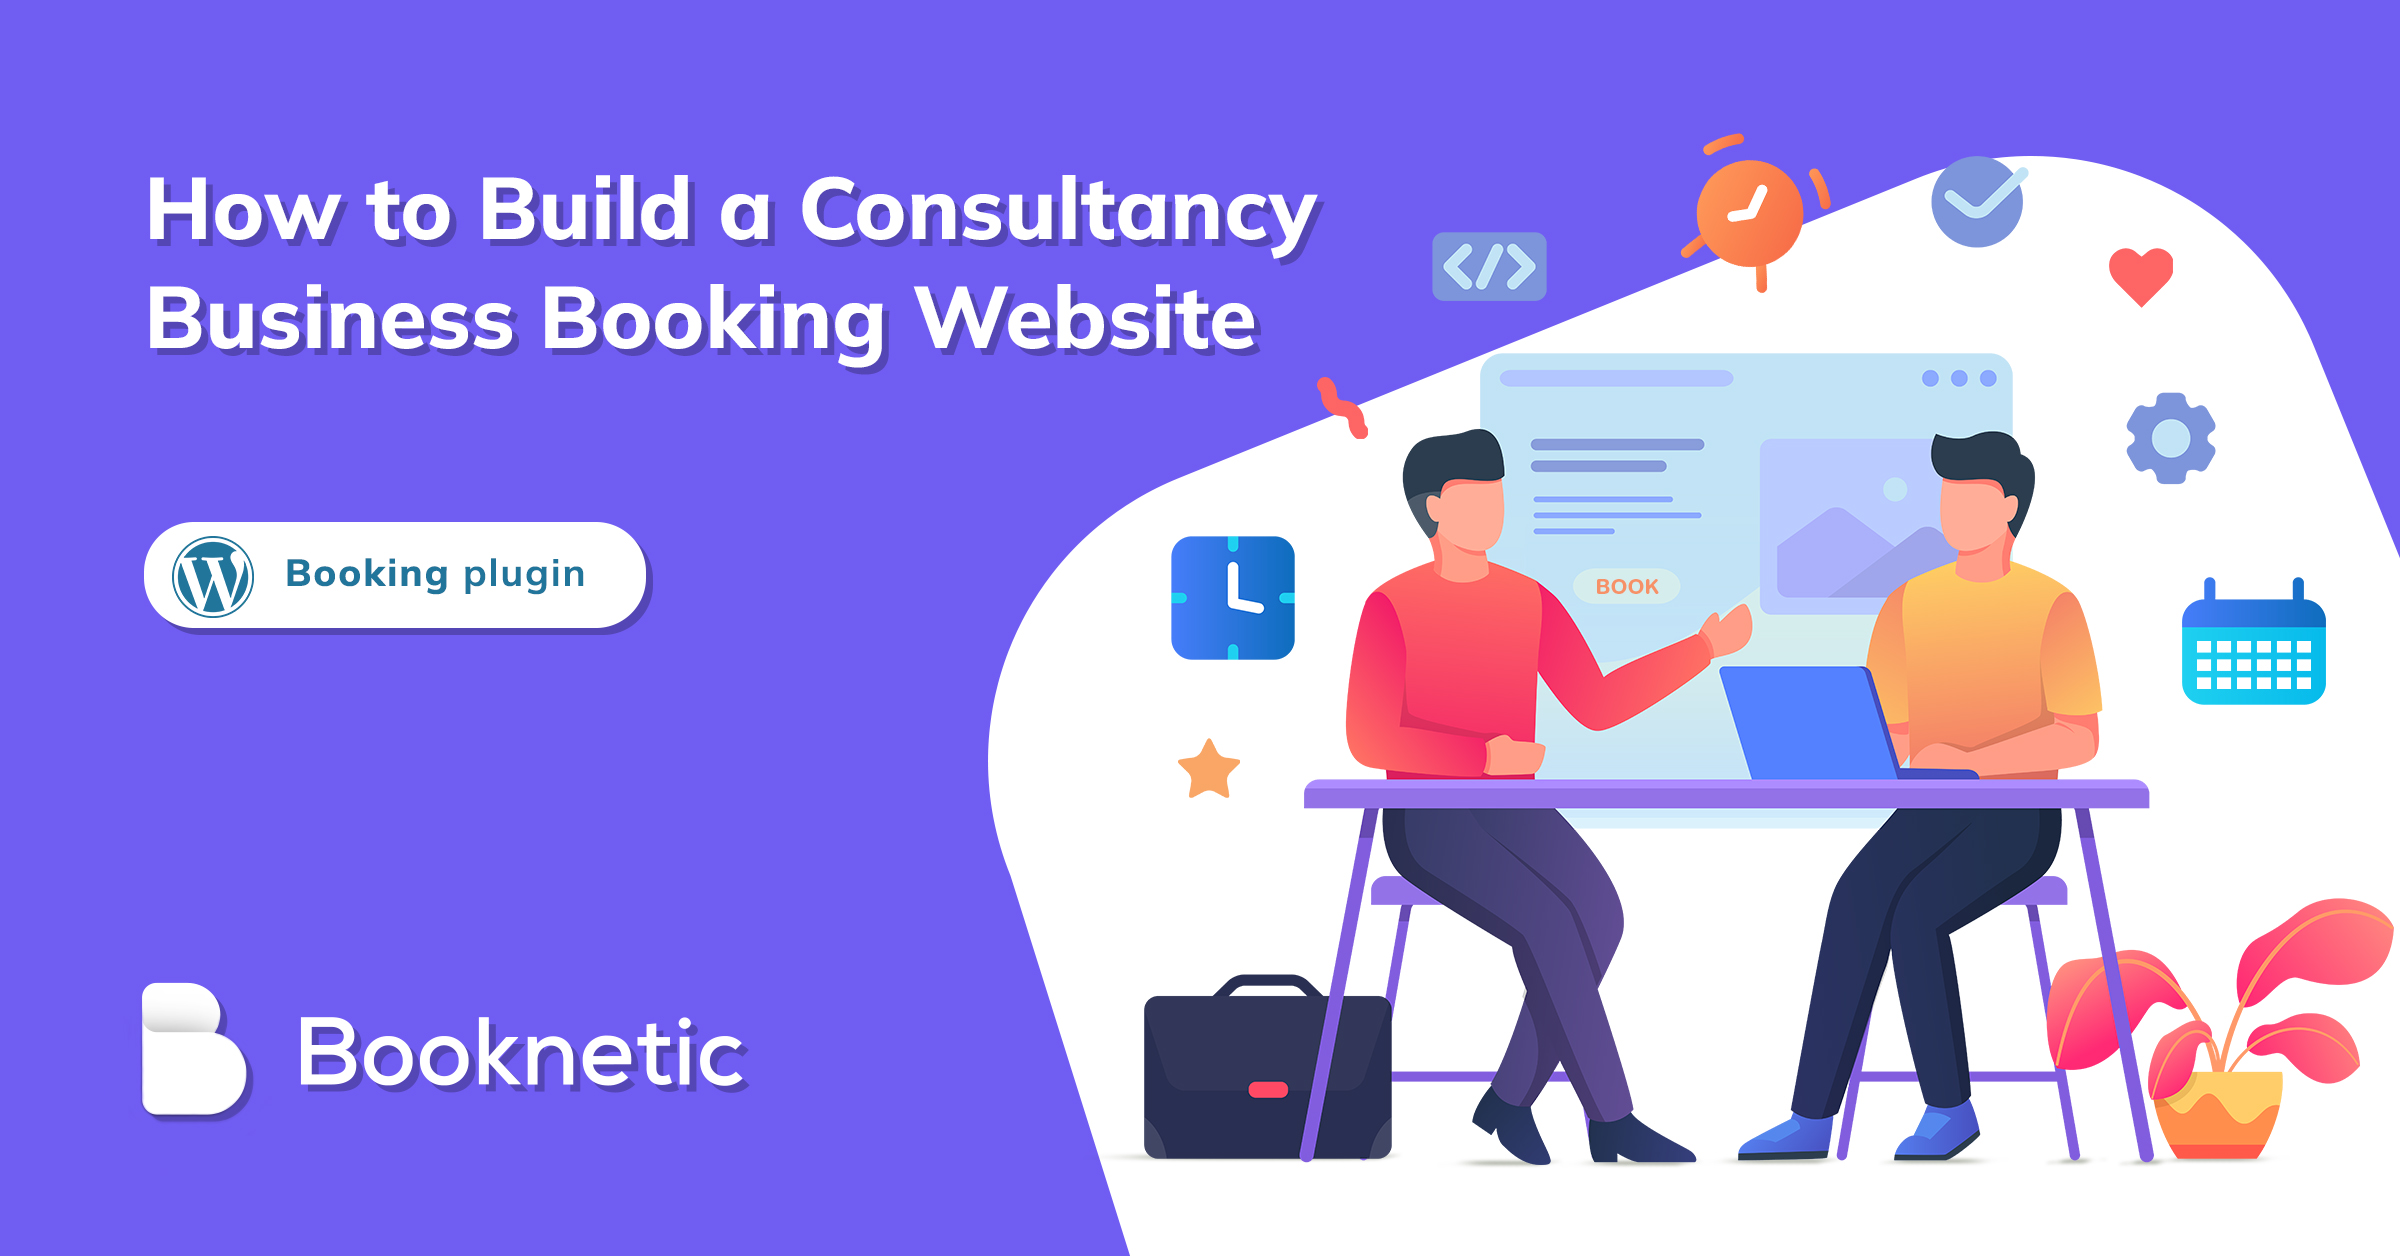 How to Build a Consultancy Business Booking Website